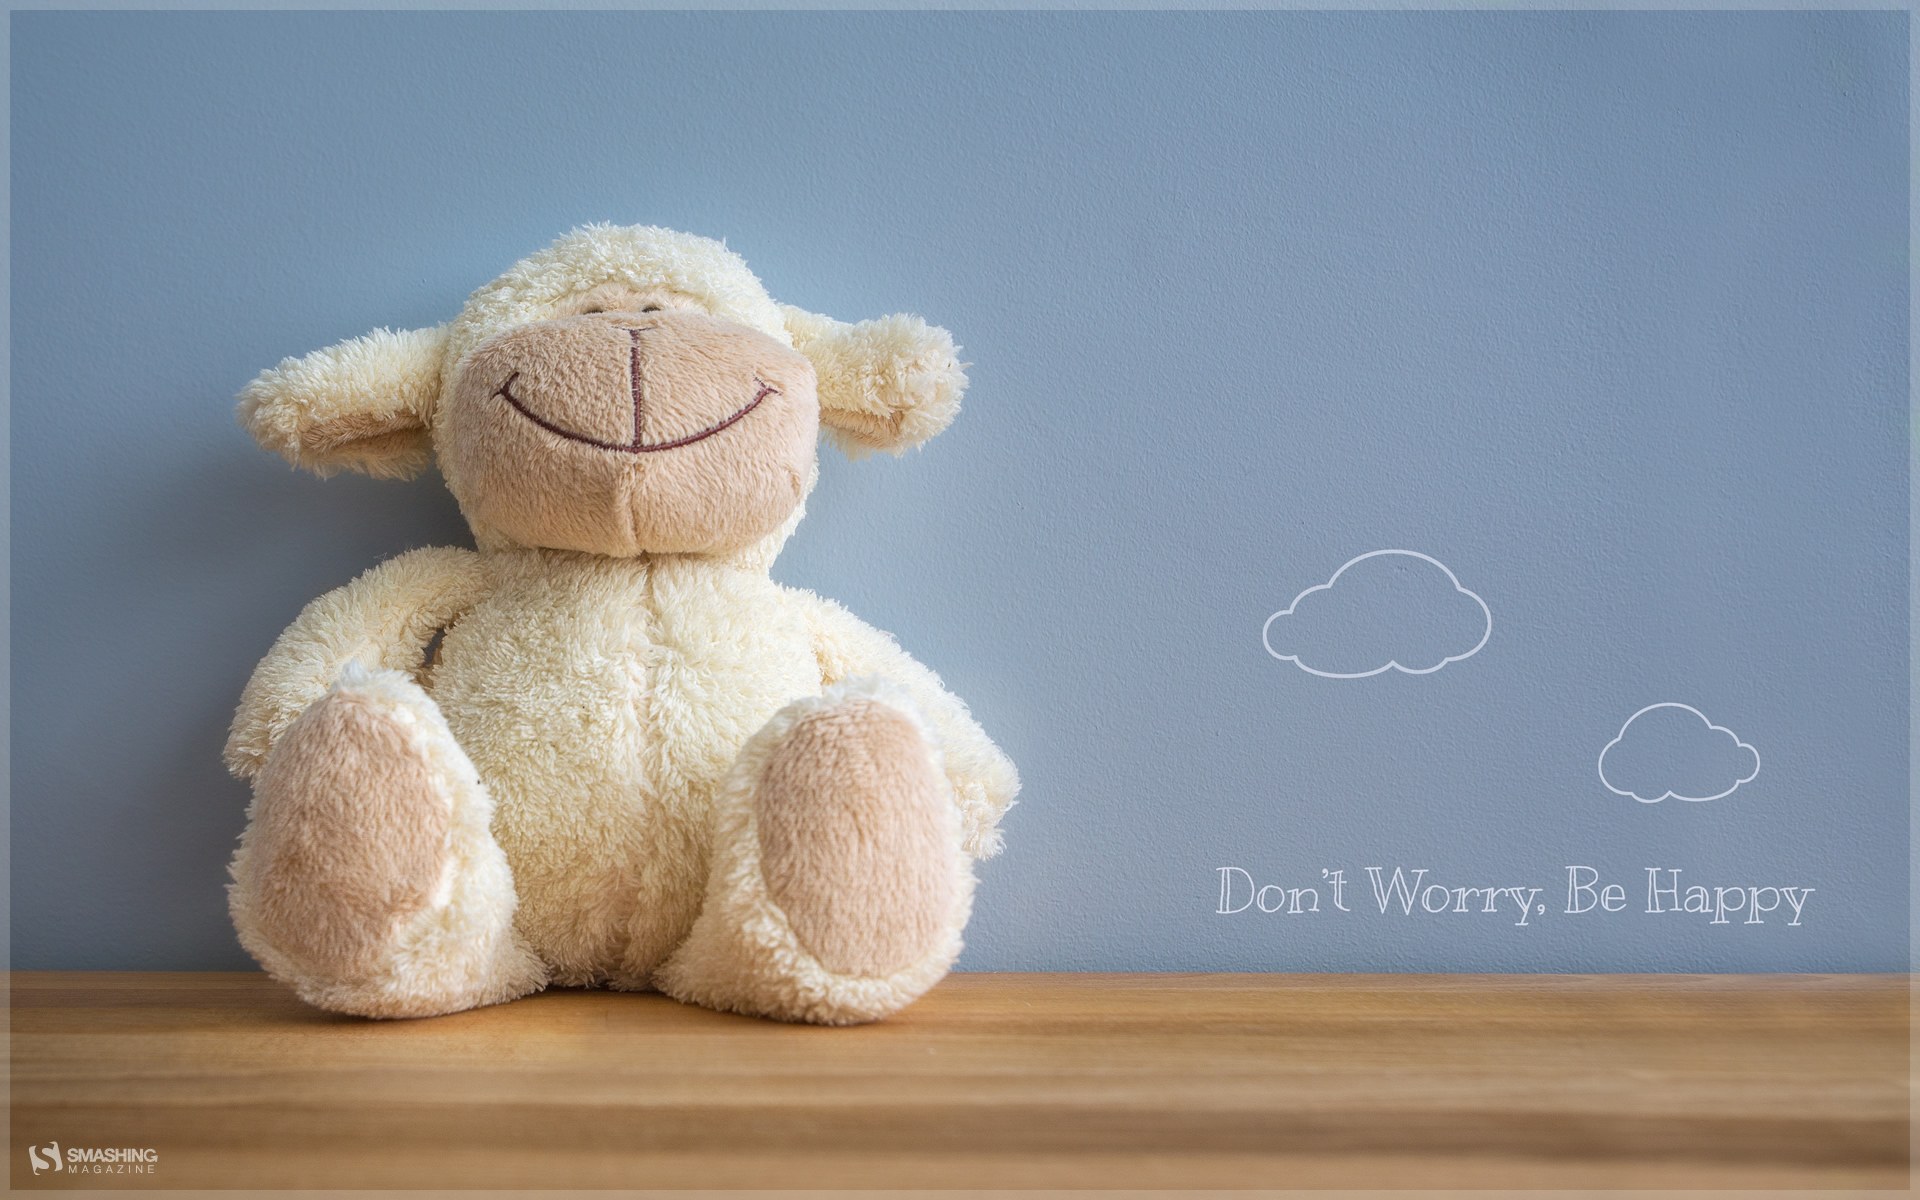 happy wallpapers with quotes,stuffed toy,toy,teddy bear,plush,product